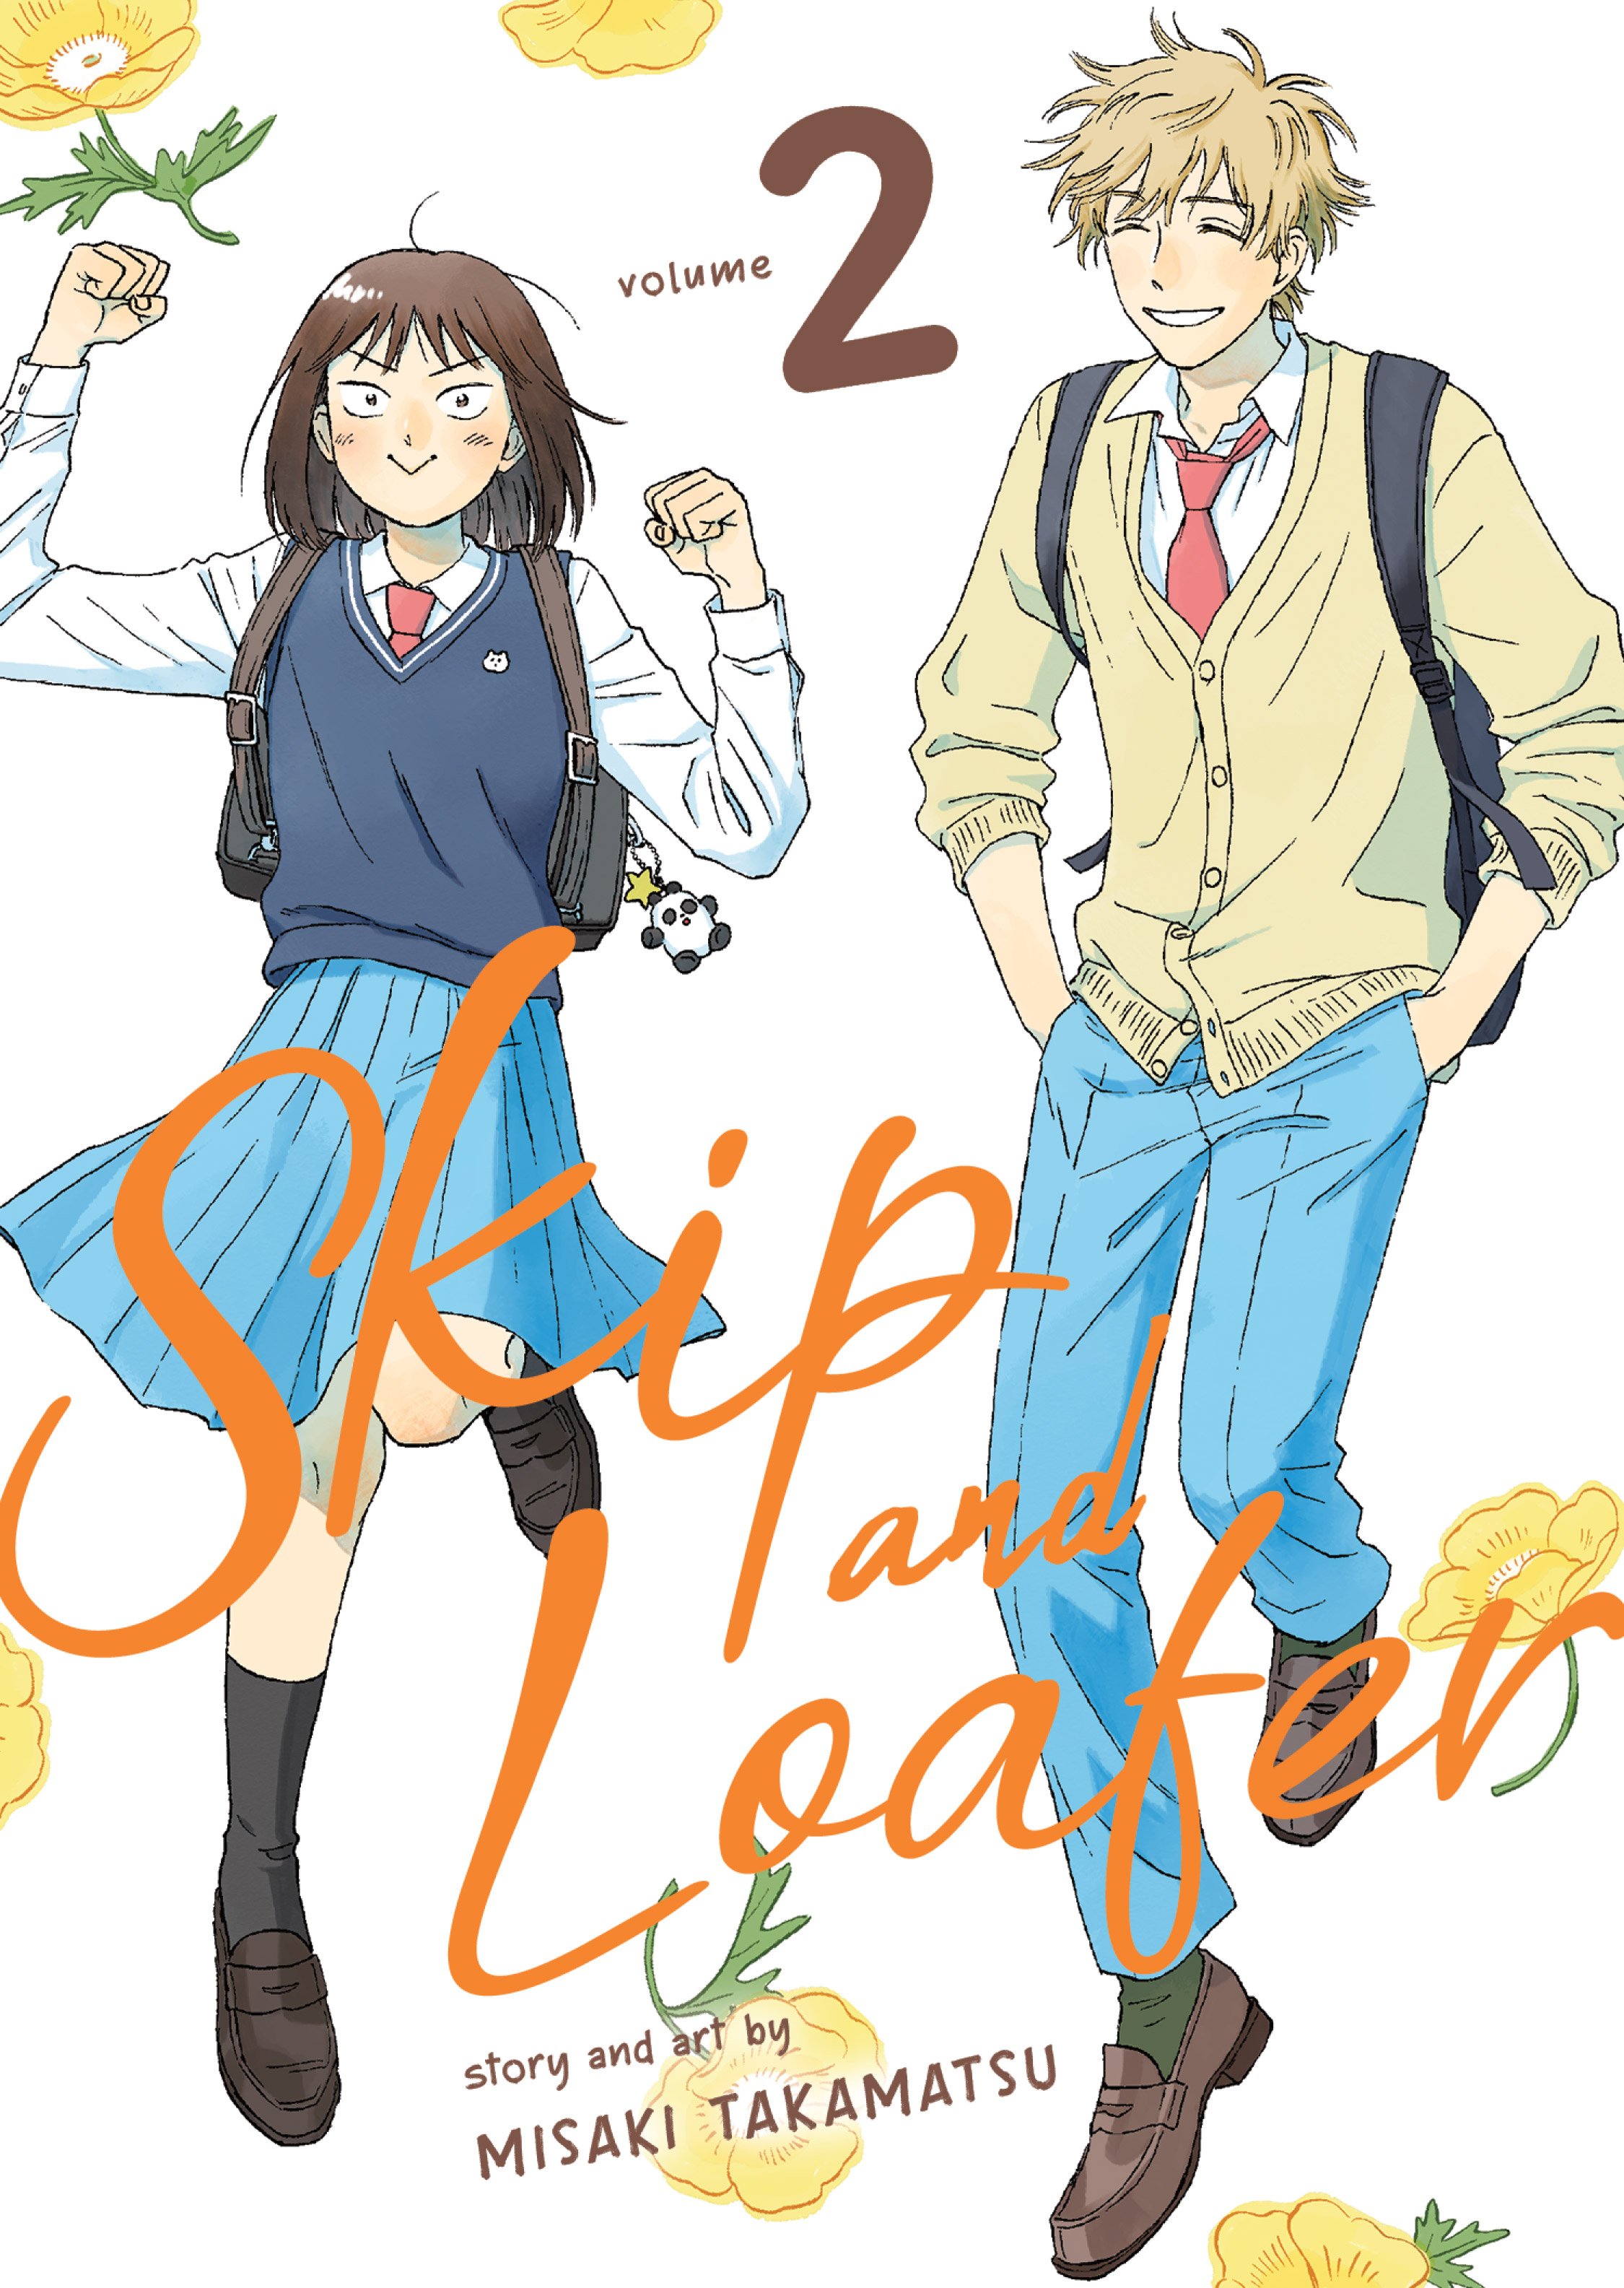 Skip and Loafer Episode 10 Release Date & Time